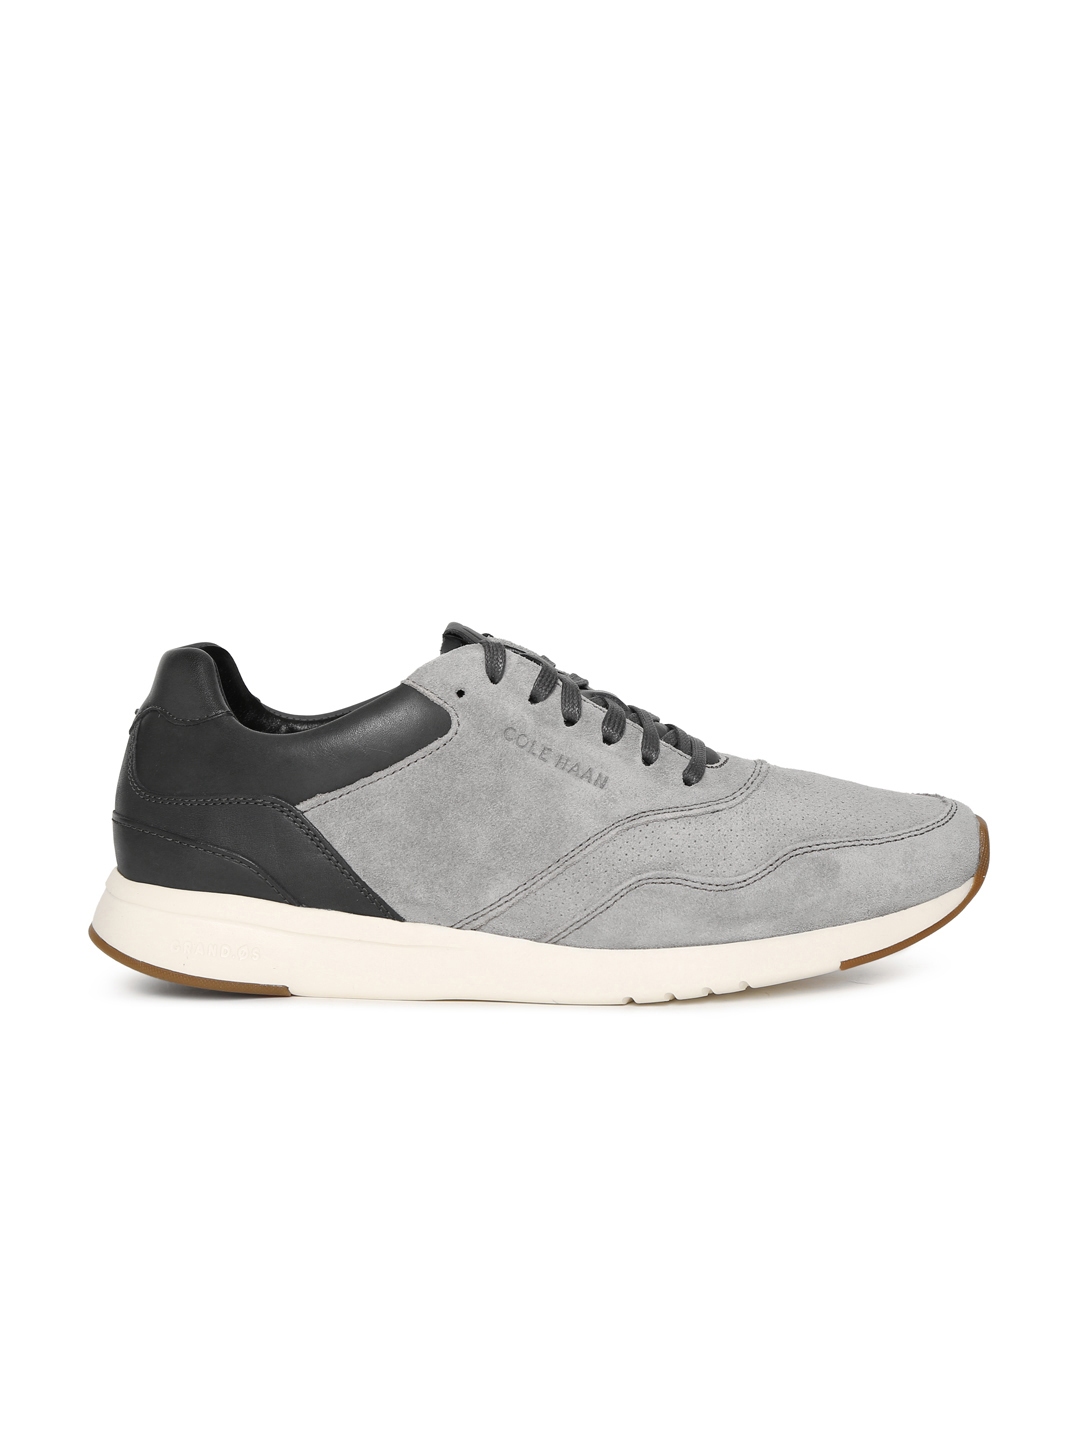 Buy Cole Haan Men Grey Leather Sneakers - Casual Shoes for Men 2530779 ...